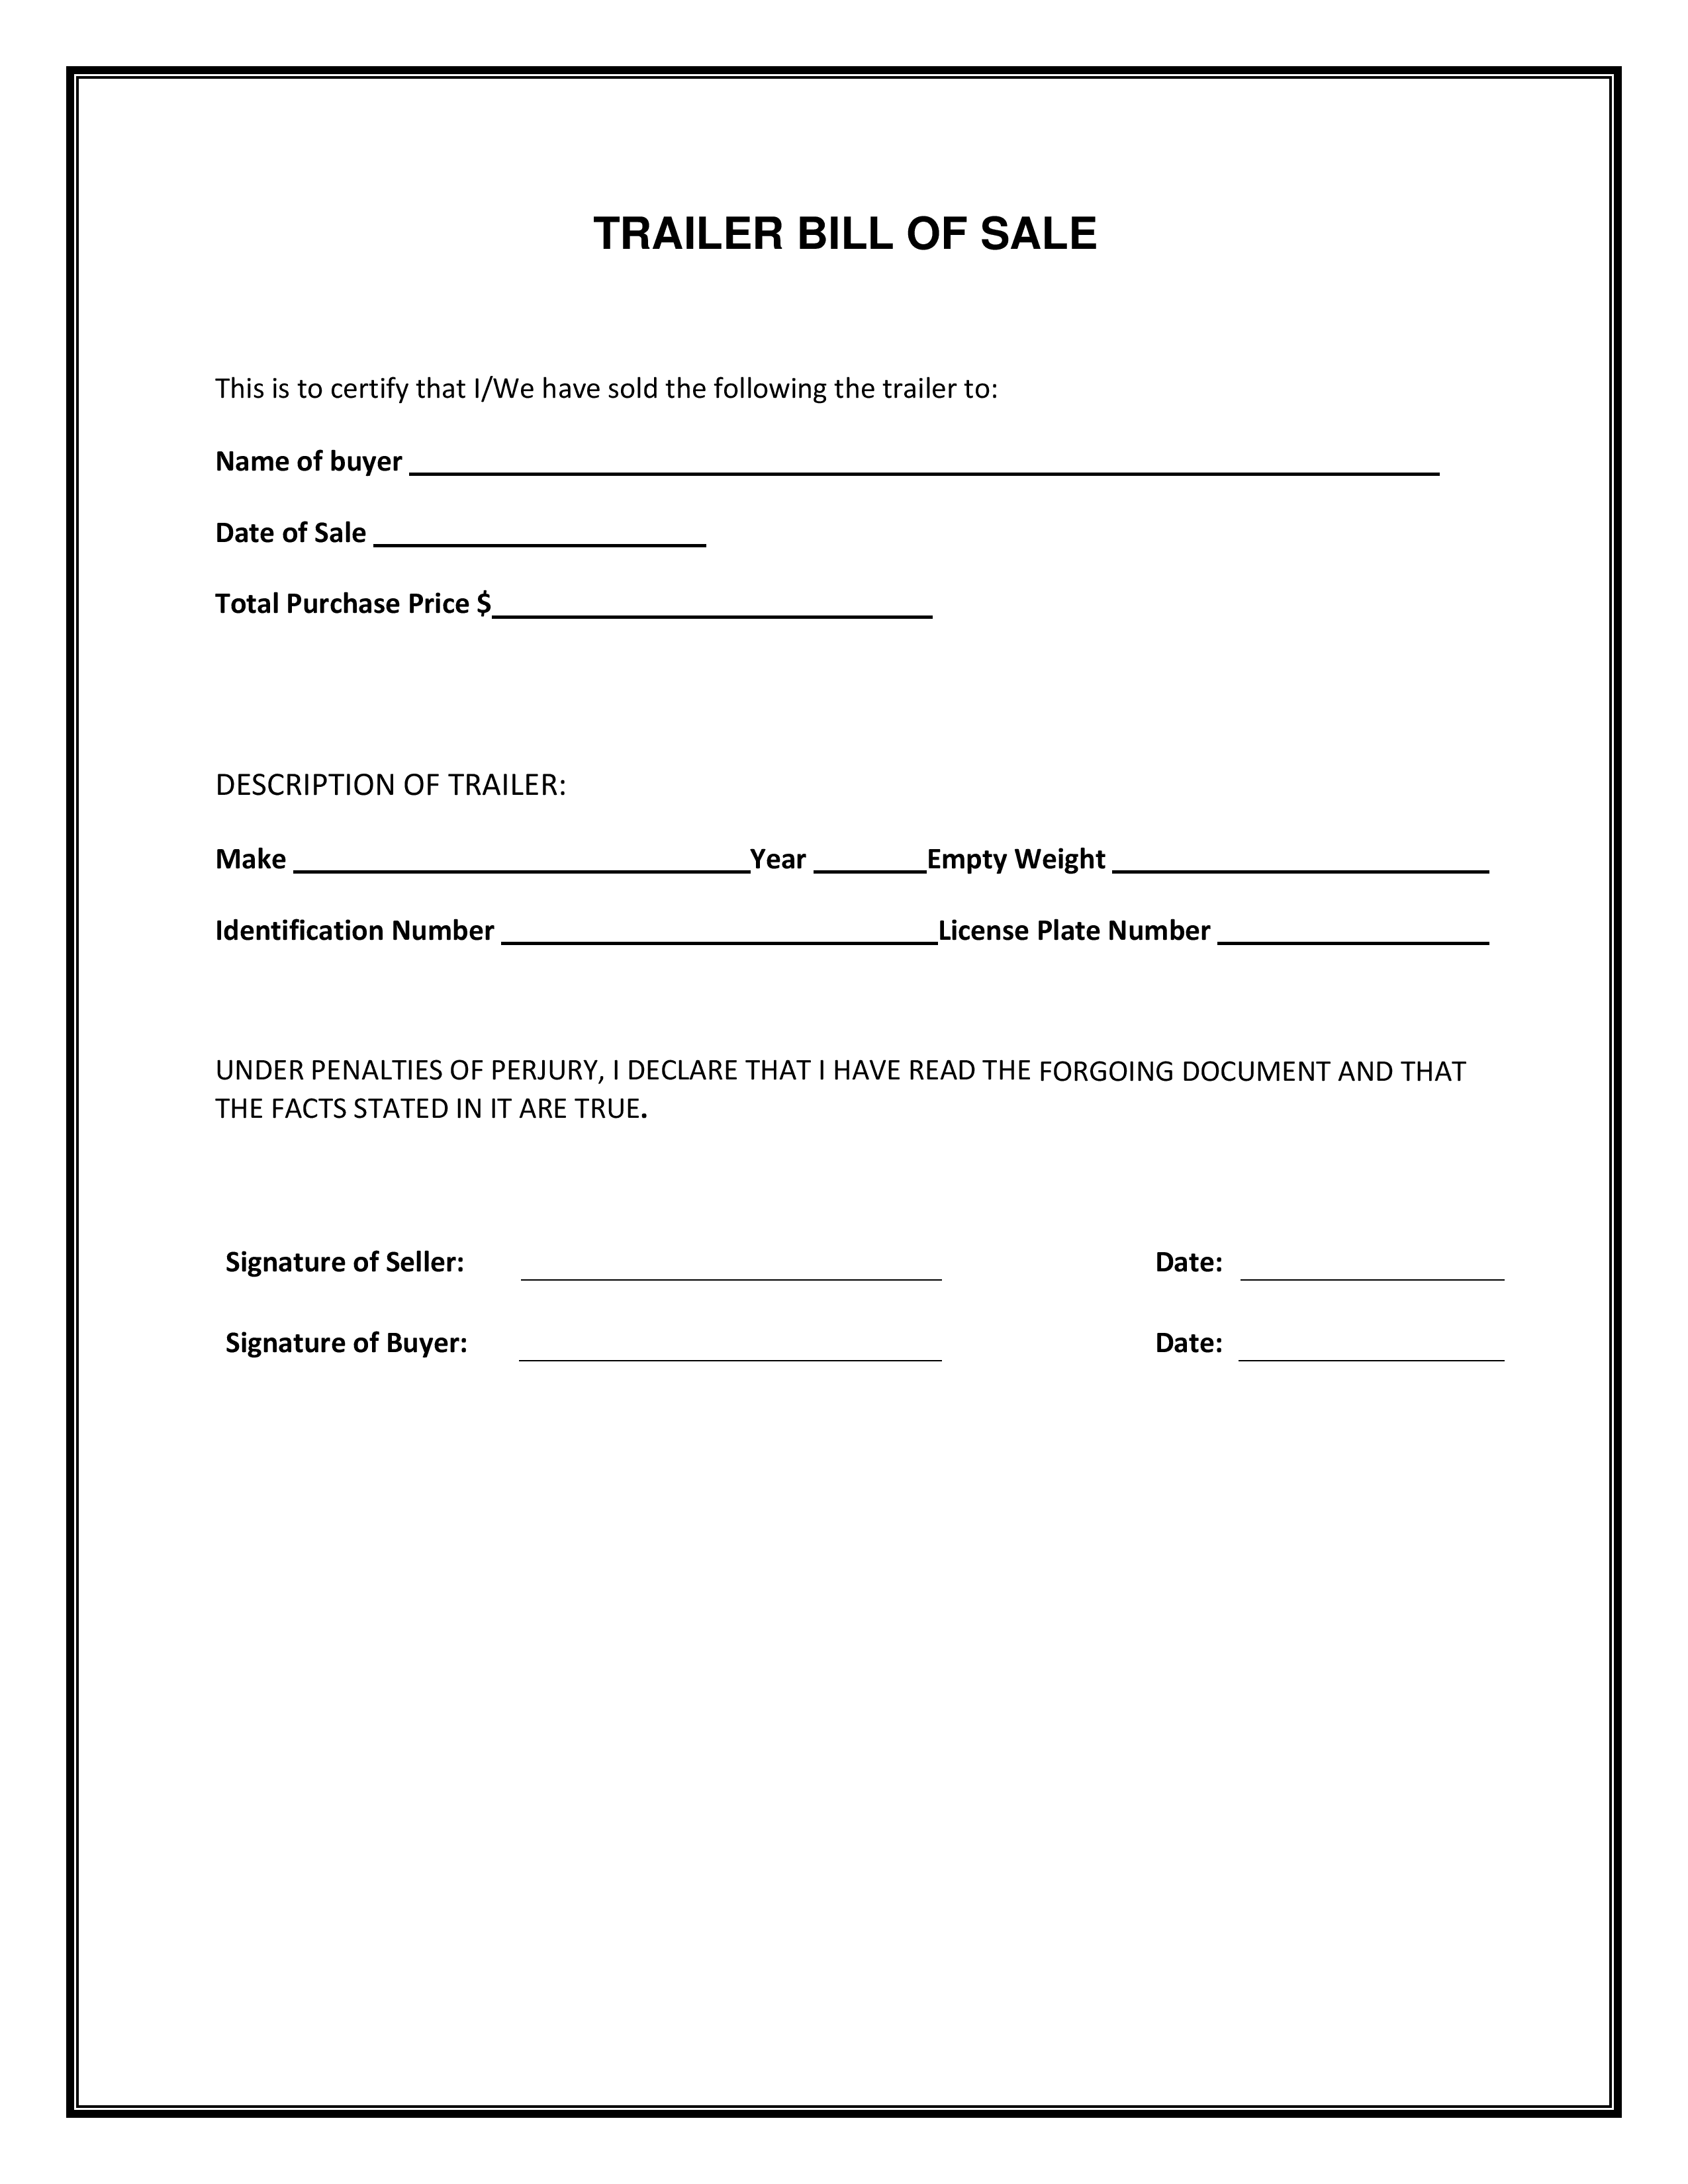 mississippi-rv-bill-of-sale-form-free-printable-legal-forms-images